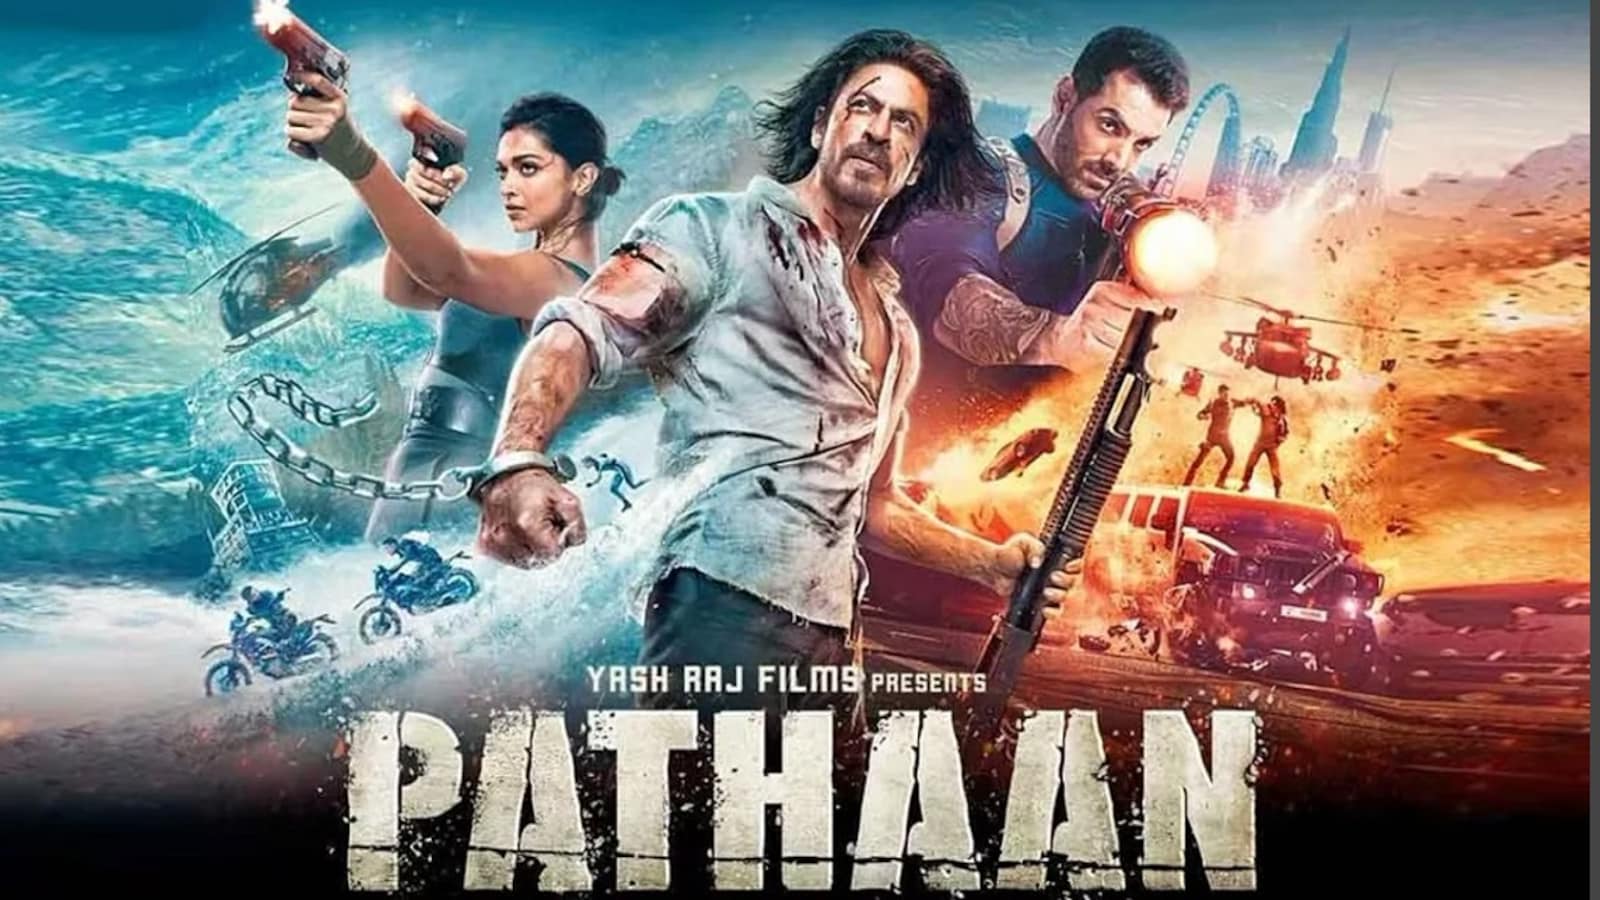 Pathaan' on Amazon Prime: Check release date of Shah Rukh Khan blockbuster